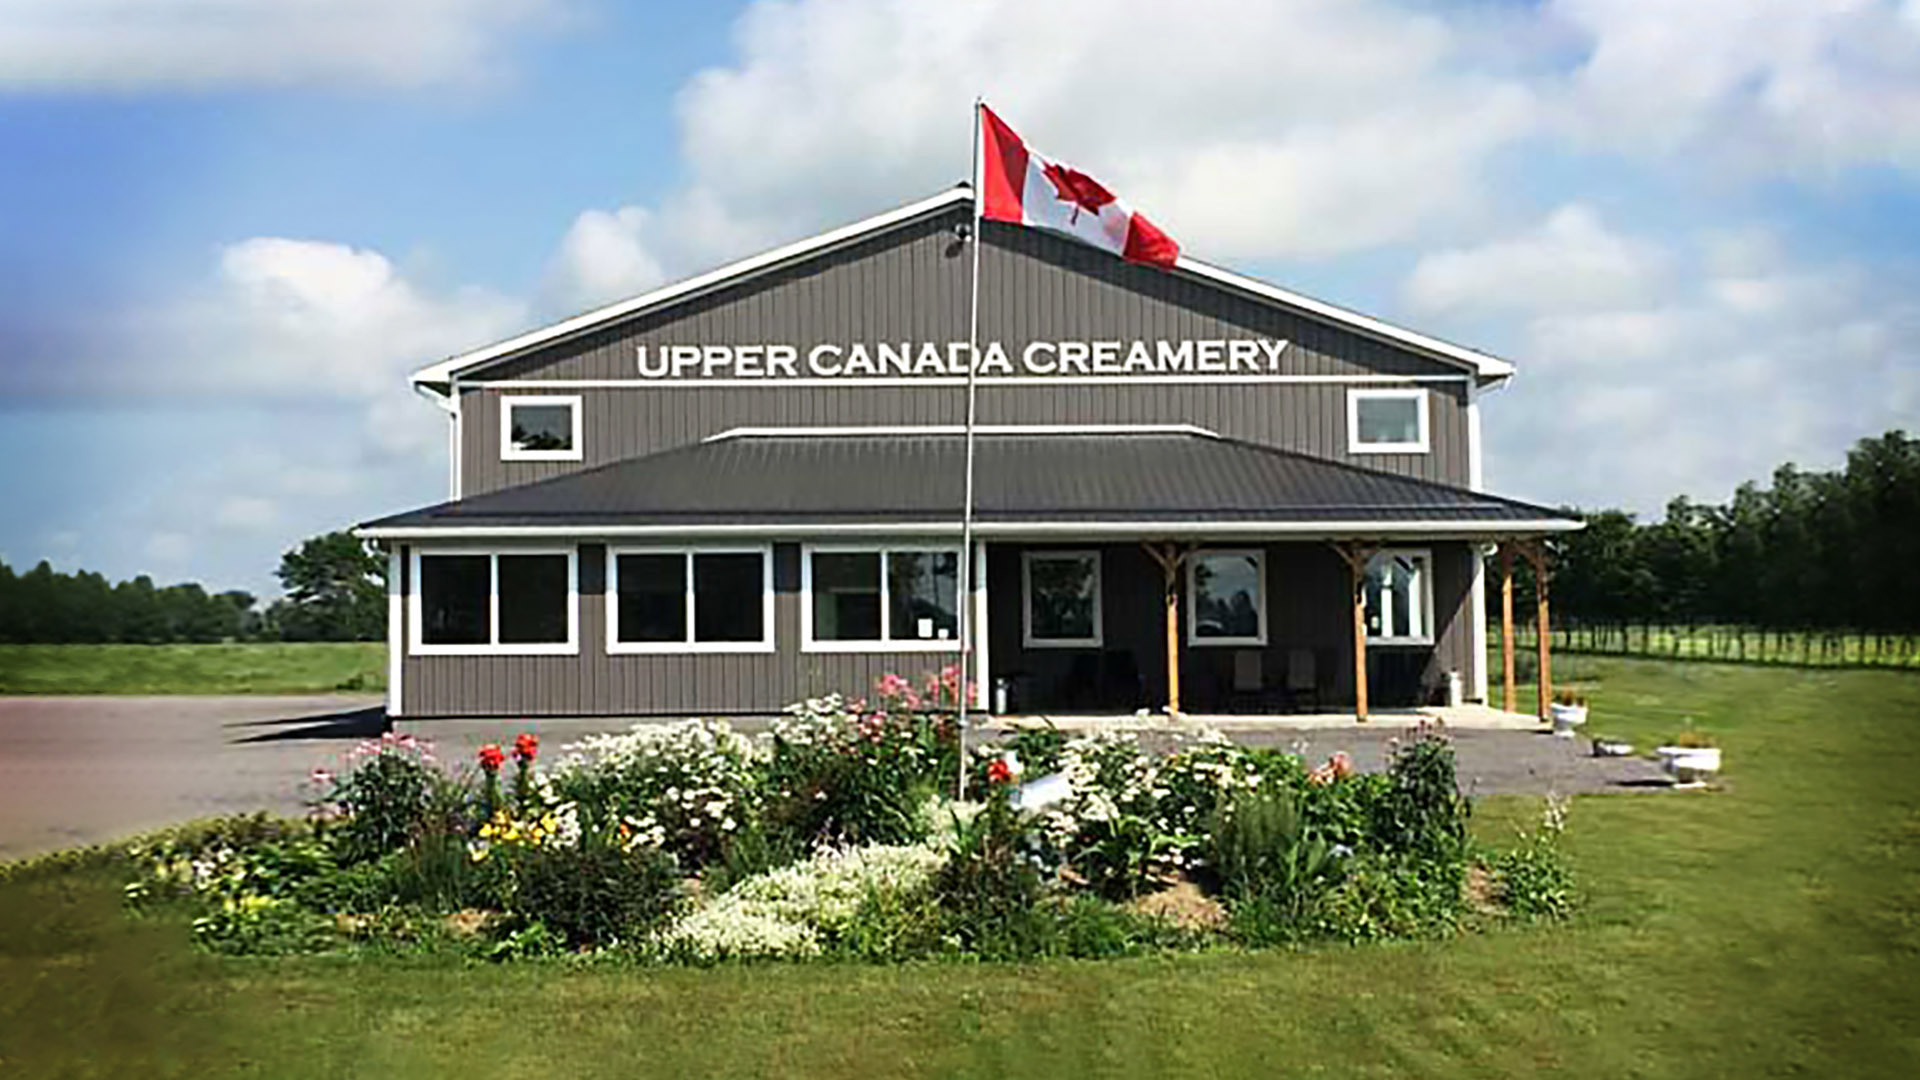 The front of the Upper Canada Creamery building.